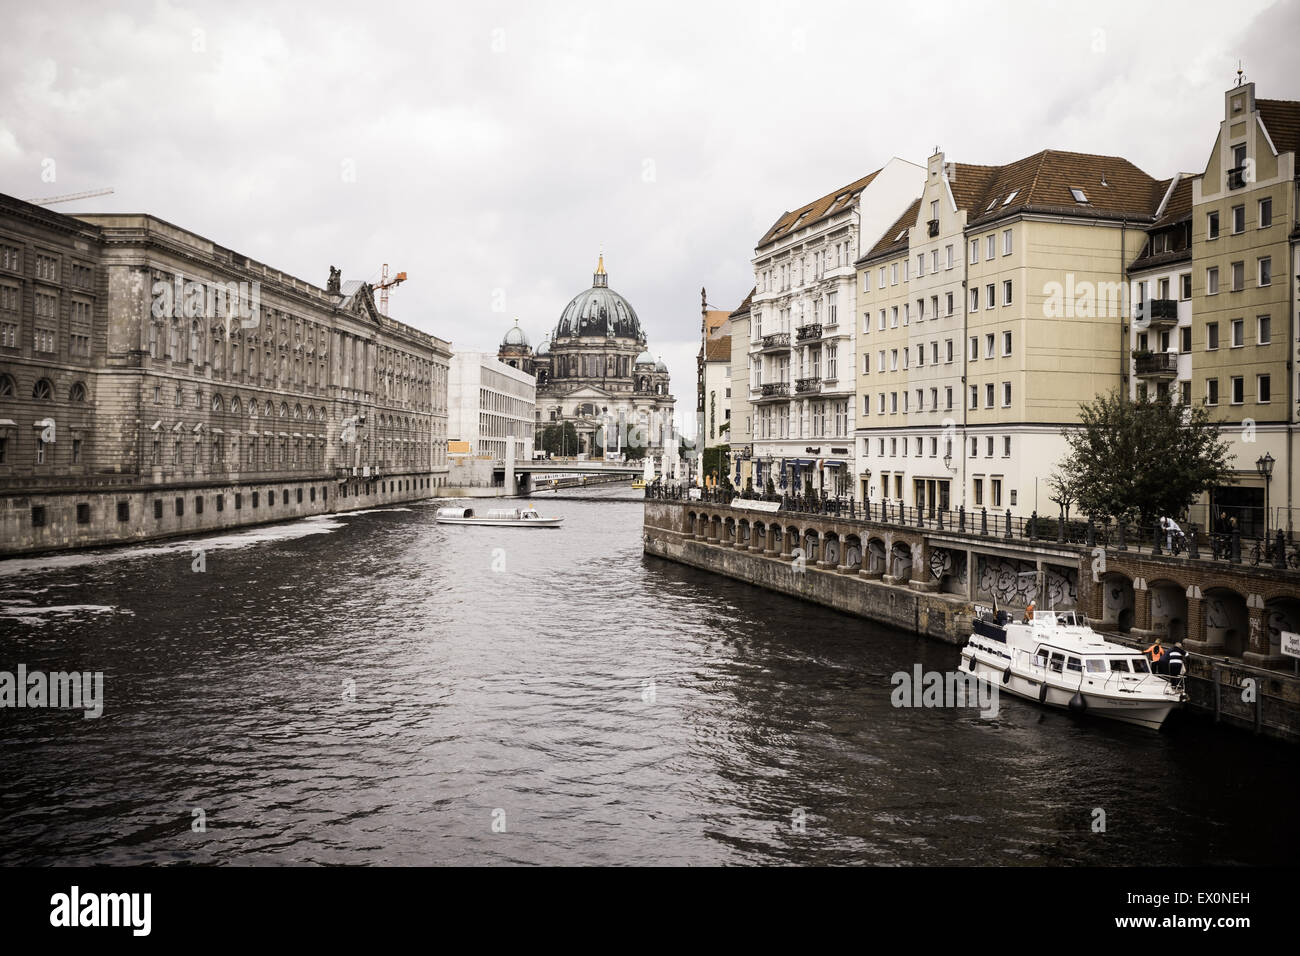 Berliner Dom Cathedral from a bridge over the Spree River in Berlin Stock Photo